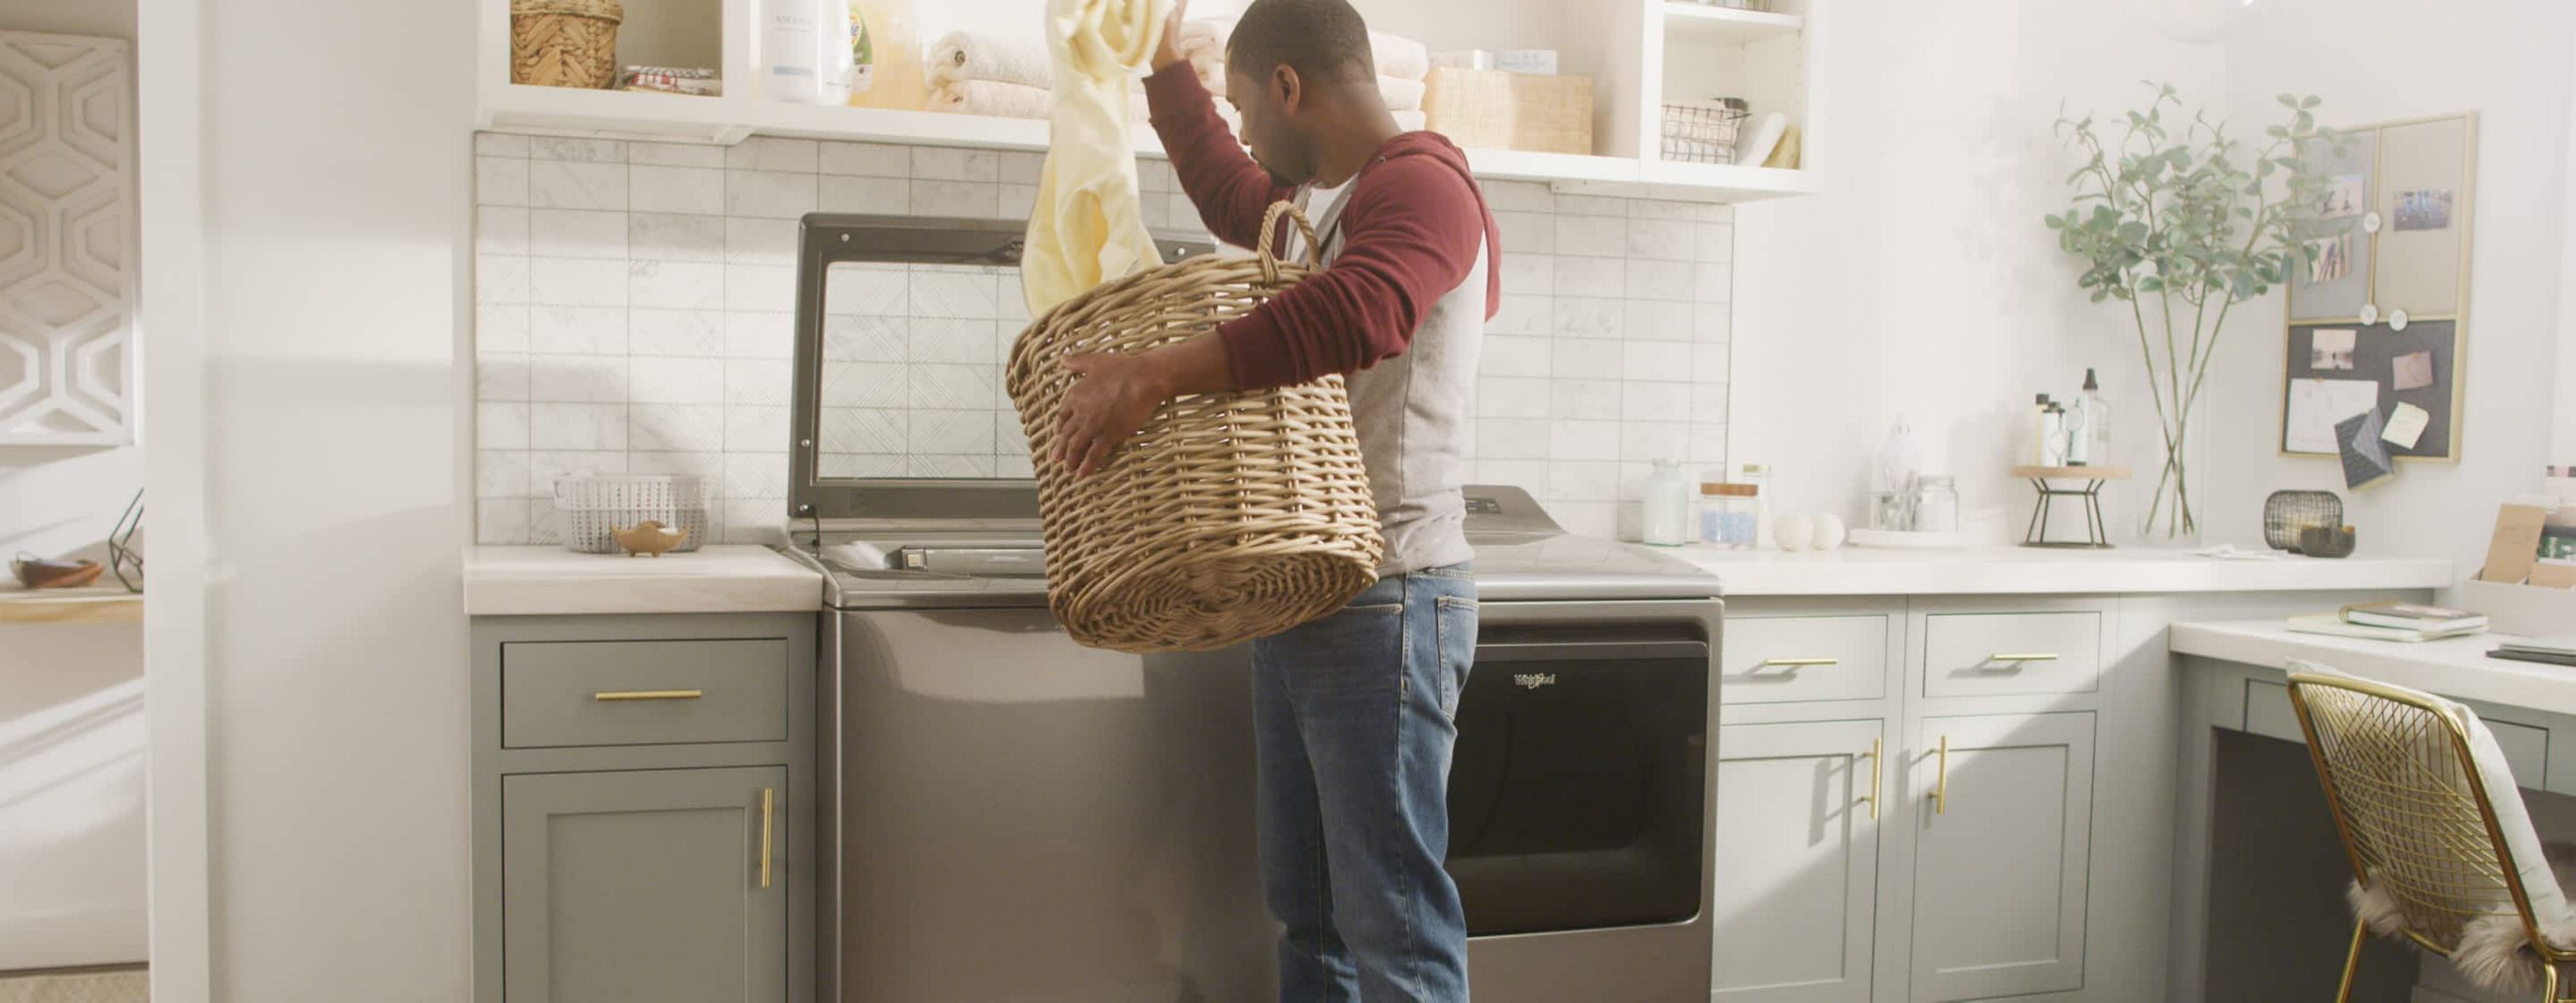 A man loads laundry in a Whirlpool® Top Load Washer and Dryer set